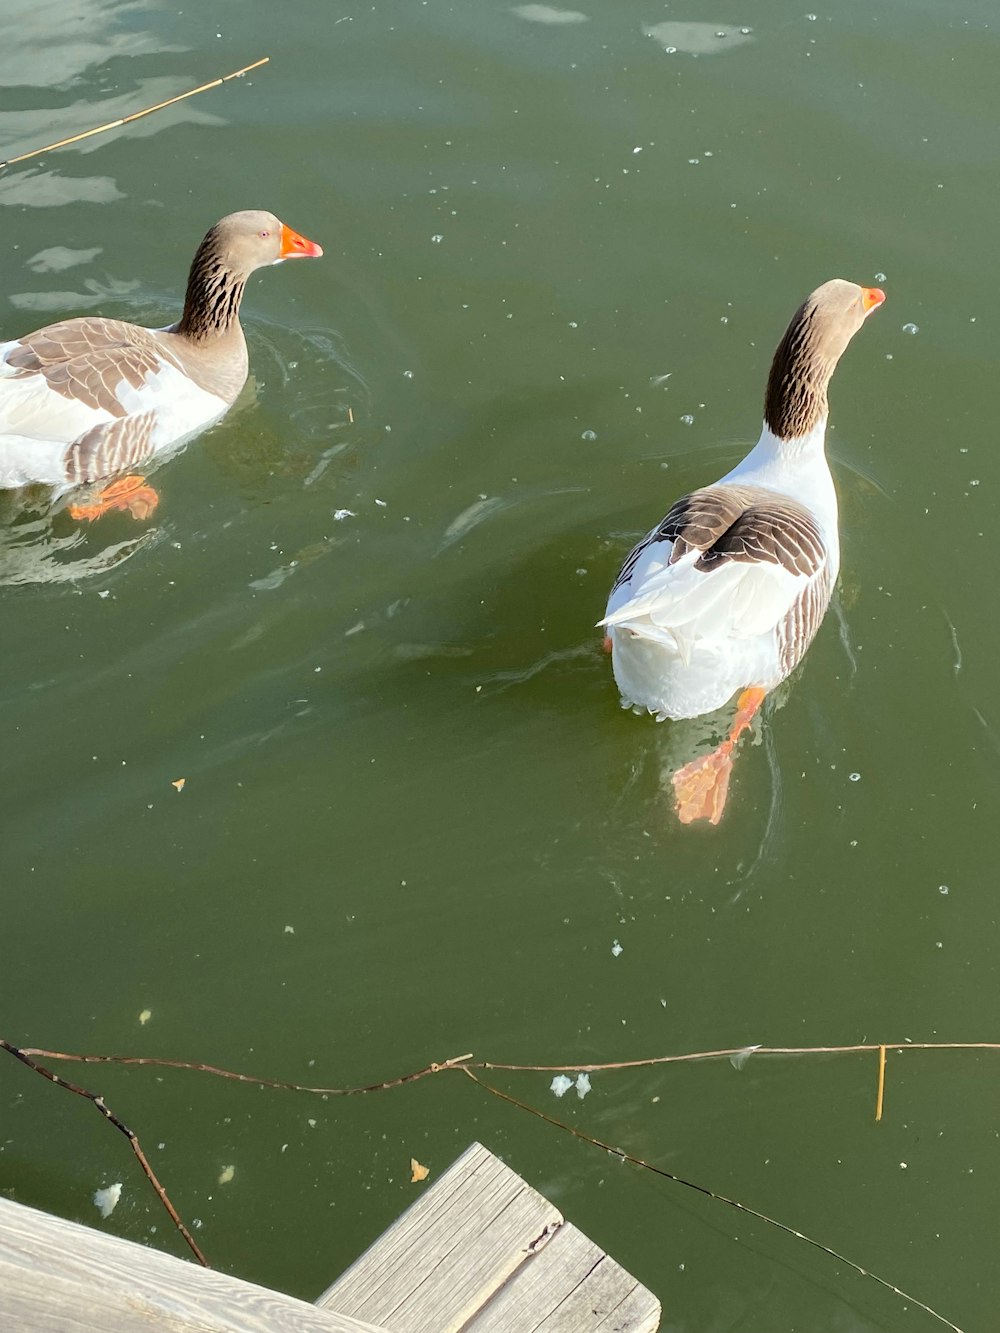 two ducks are swimming in the water near a dock